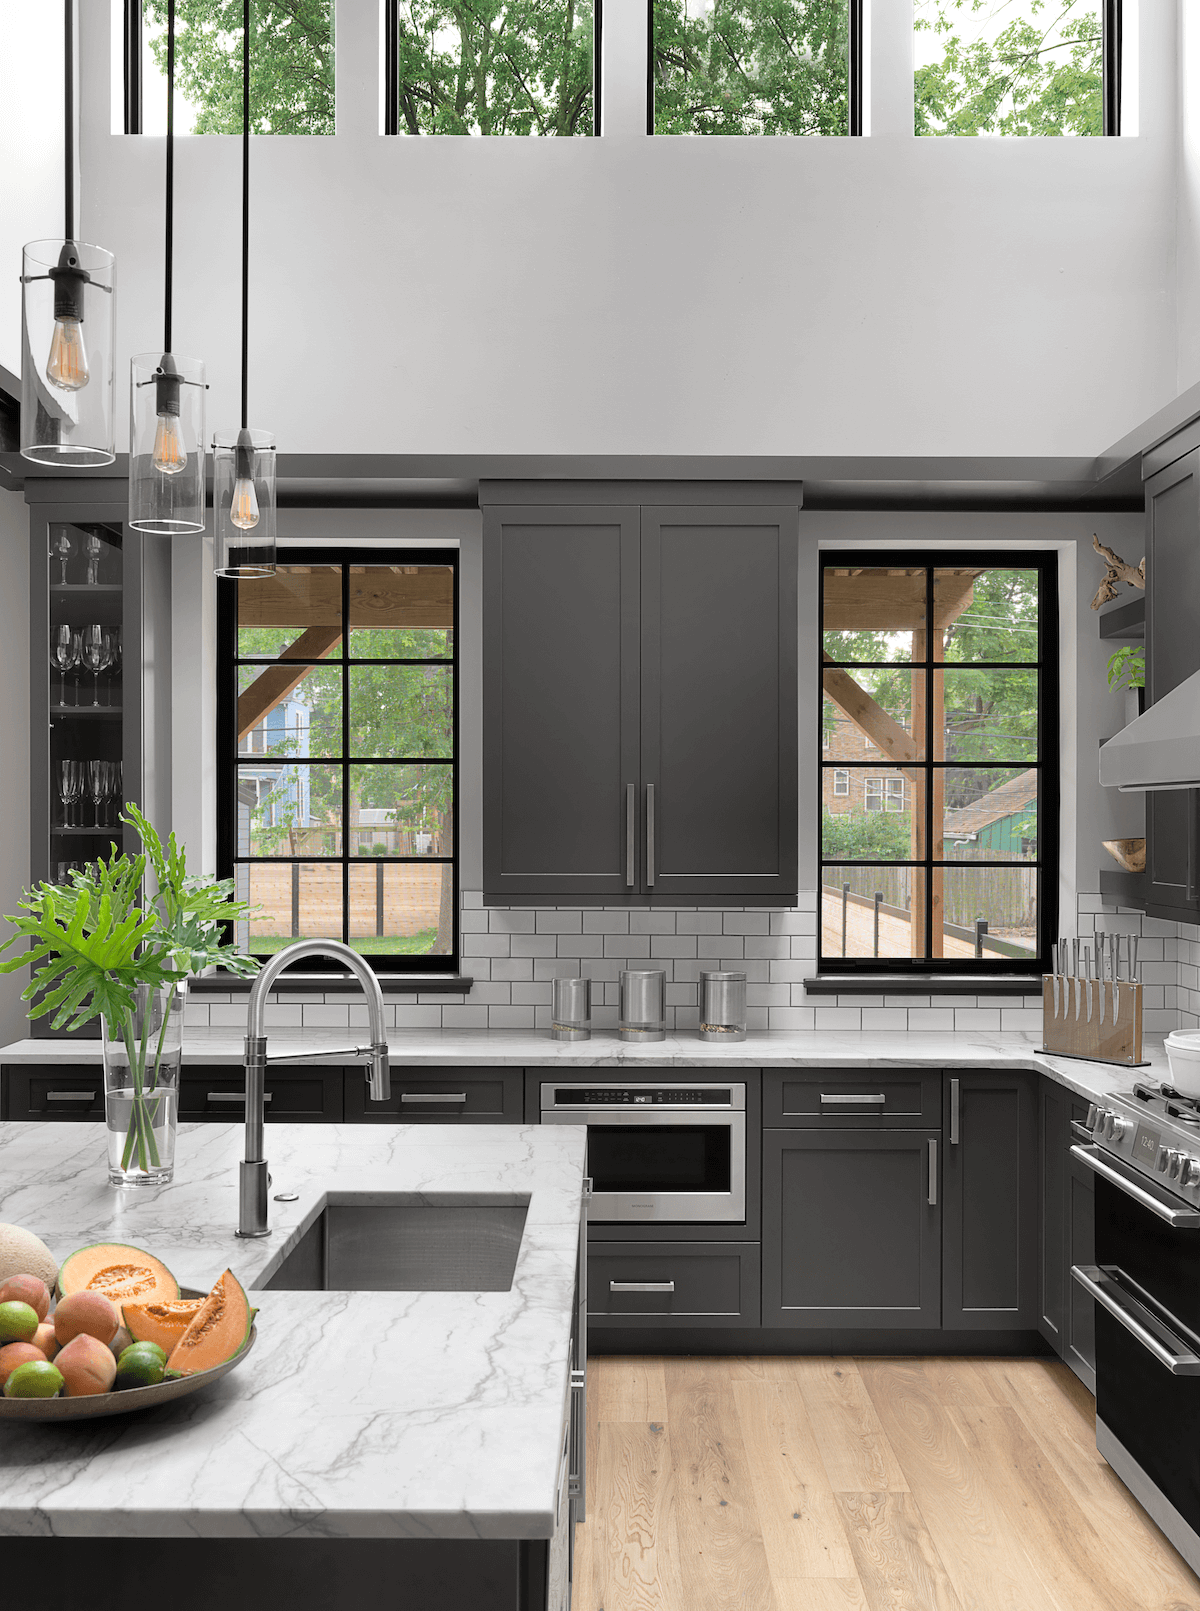 Modern Kitchen in a Historic Home